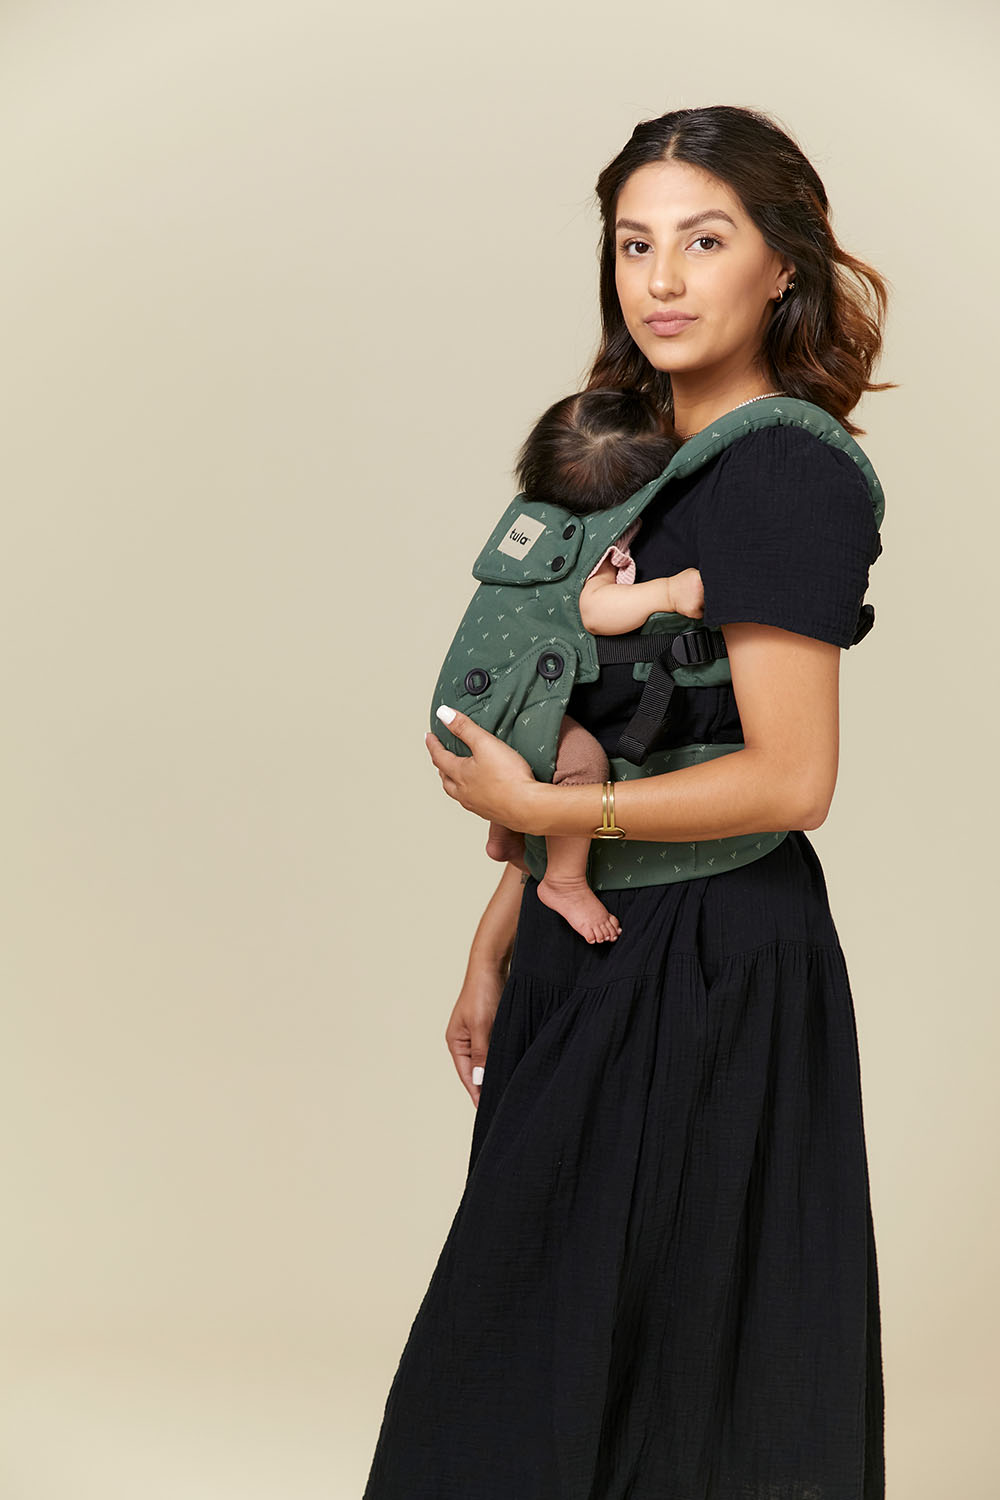 Tula Explore Baby Carrier Seedling